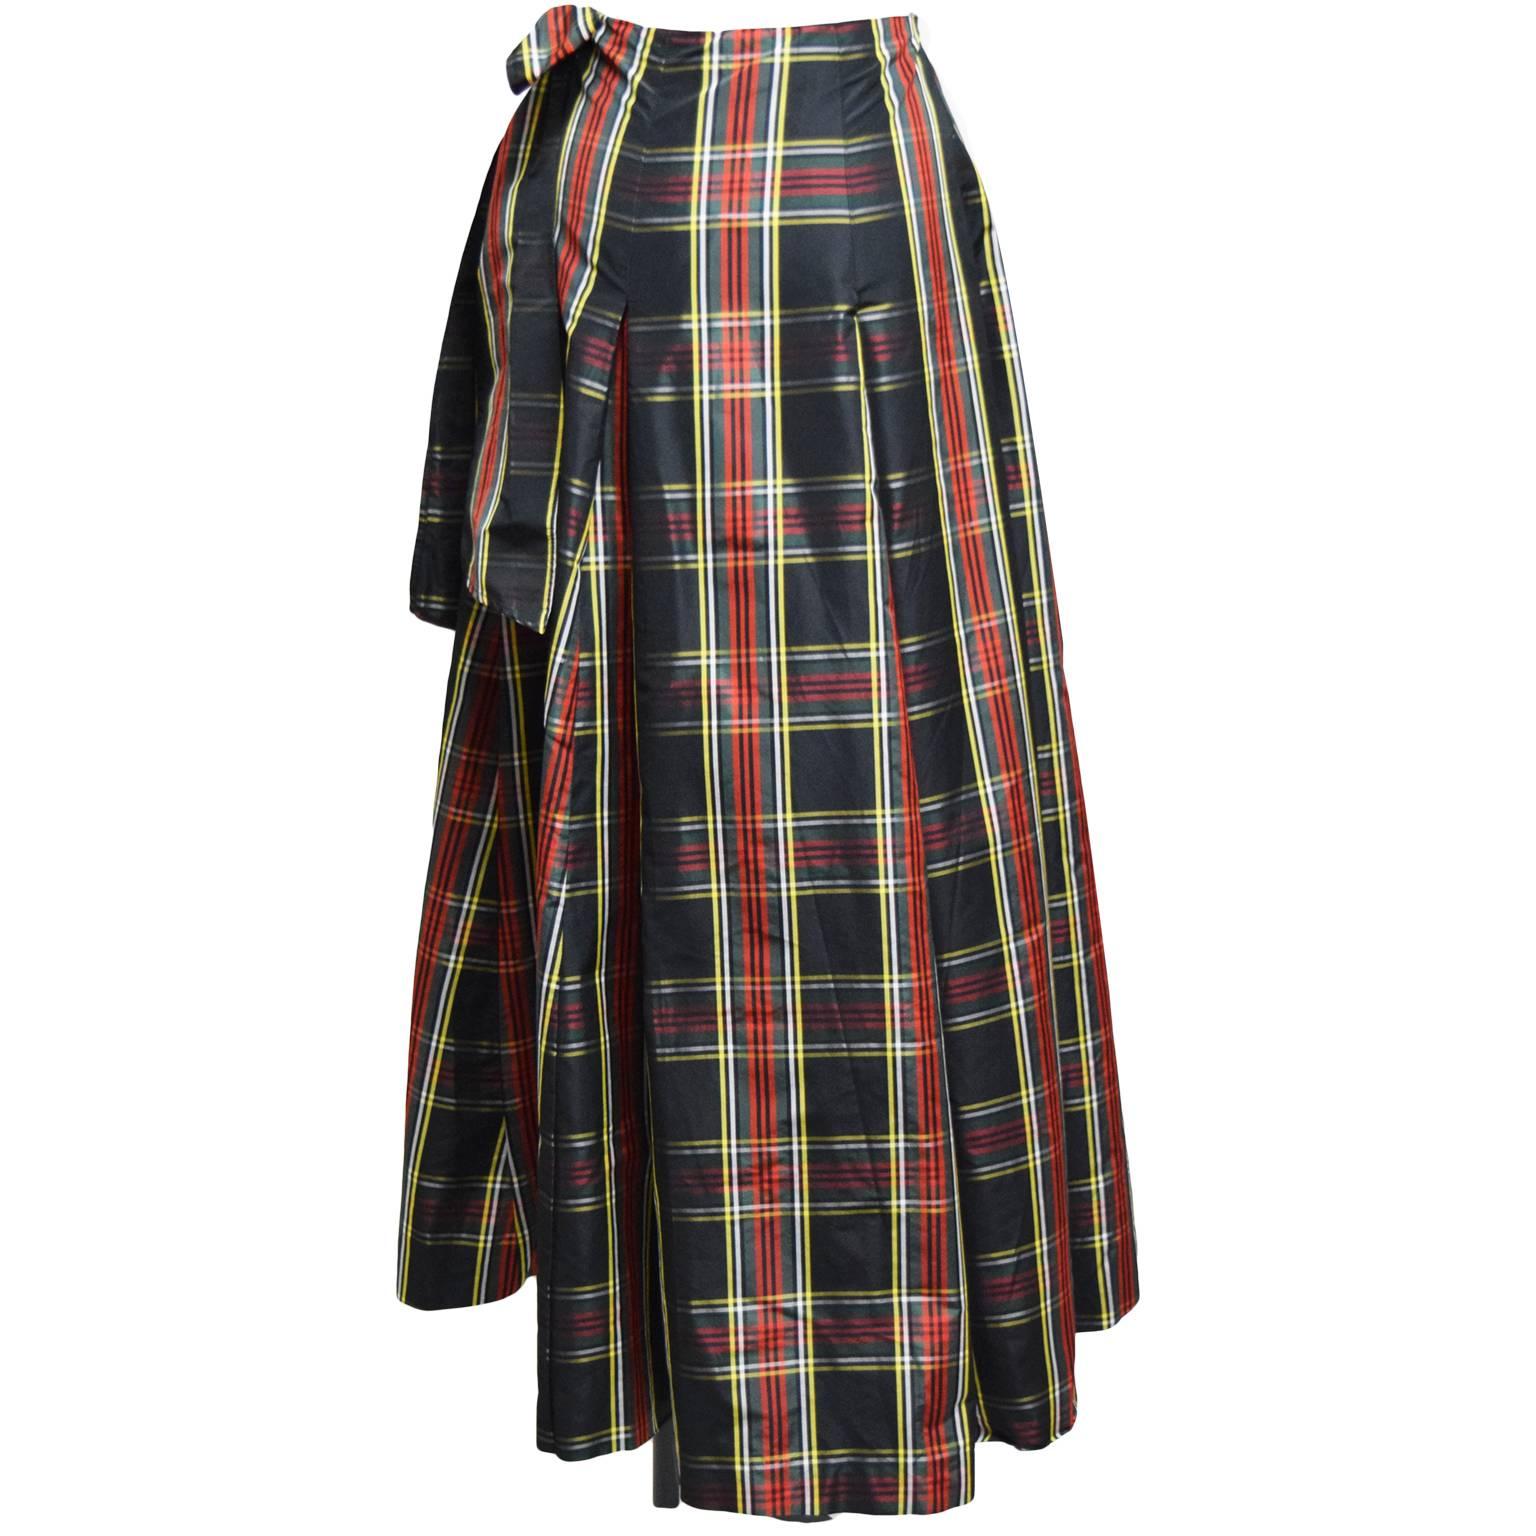 This Moschino skirt is made from 100% silk and plaid printed. The waist inseam button's closed and has a panel that works as a wrap that ties on the other side of the waist creating a full wrap skirt. The skirt lastly has knife pleats to create a